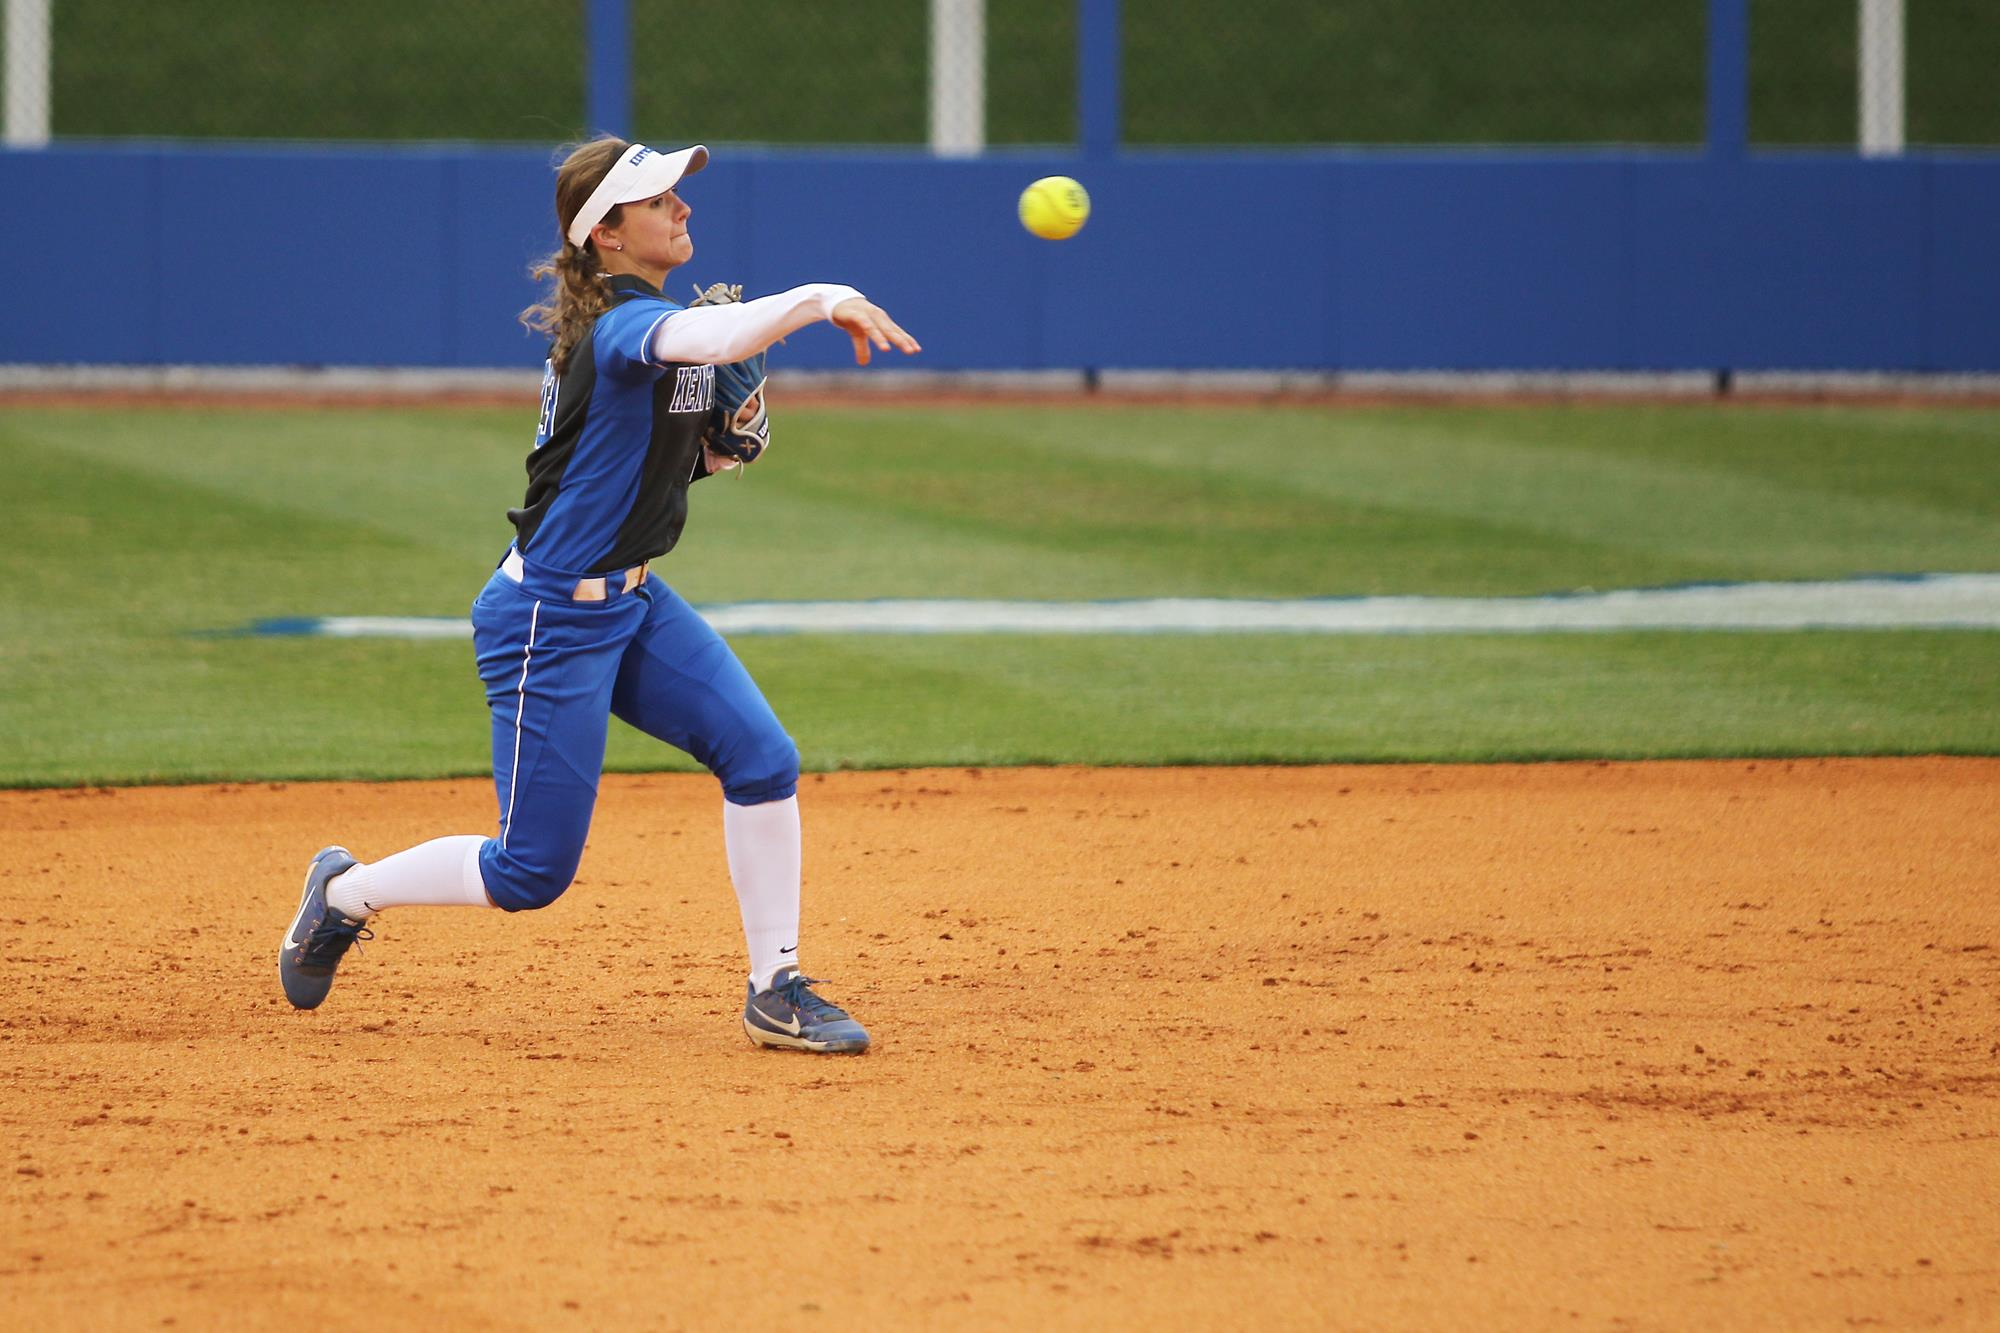 Humes Strikes Out Nine, No. 2 Florida Sweeps Series